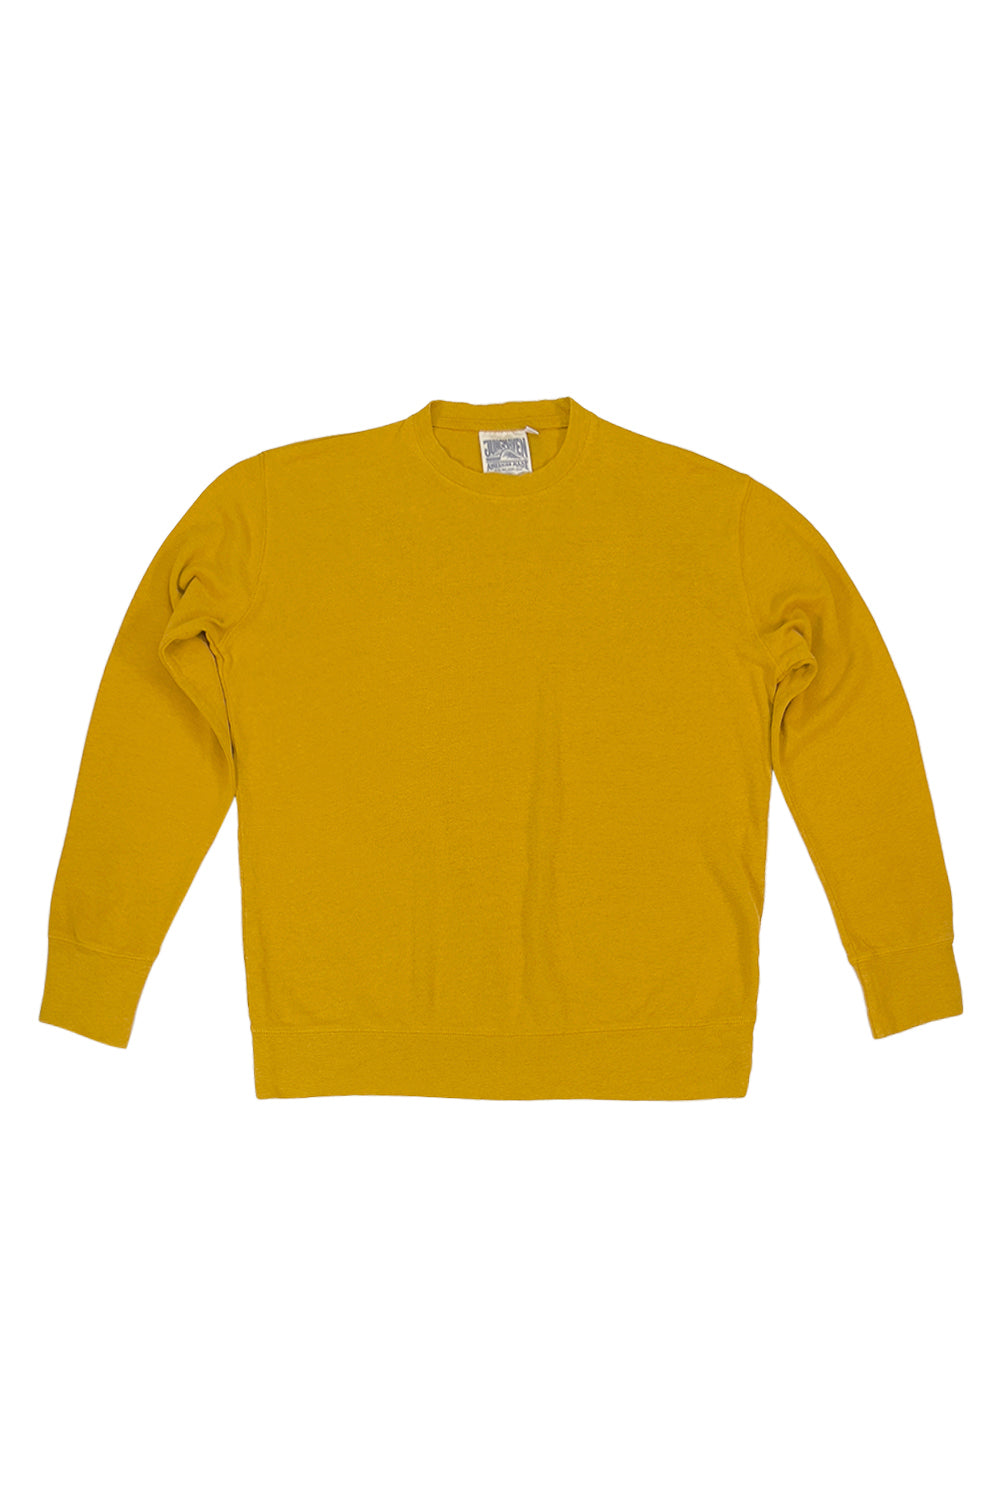 California Pullover | Jungmaven Hemp Clothing & Accessories / Color: Spicy Mustard